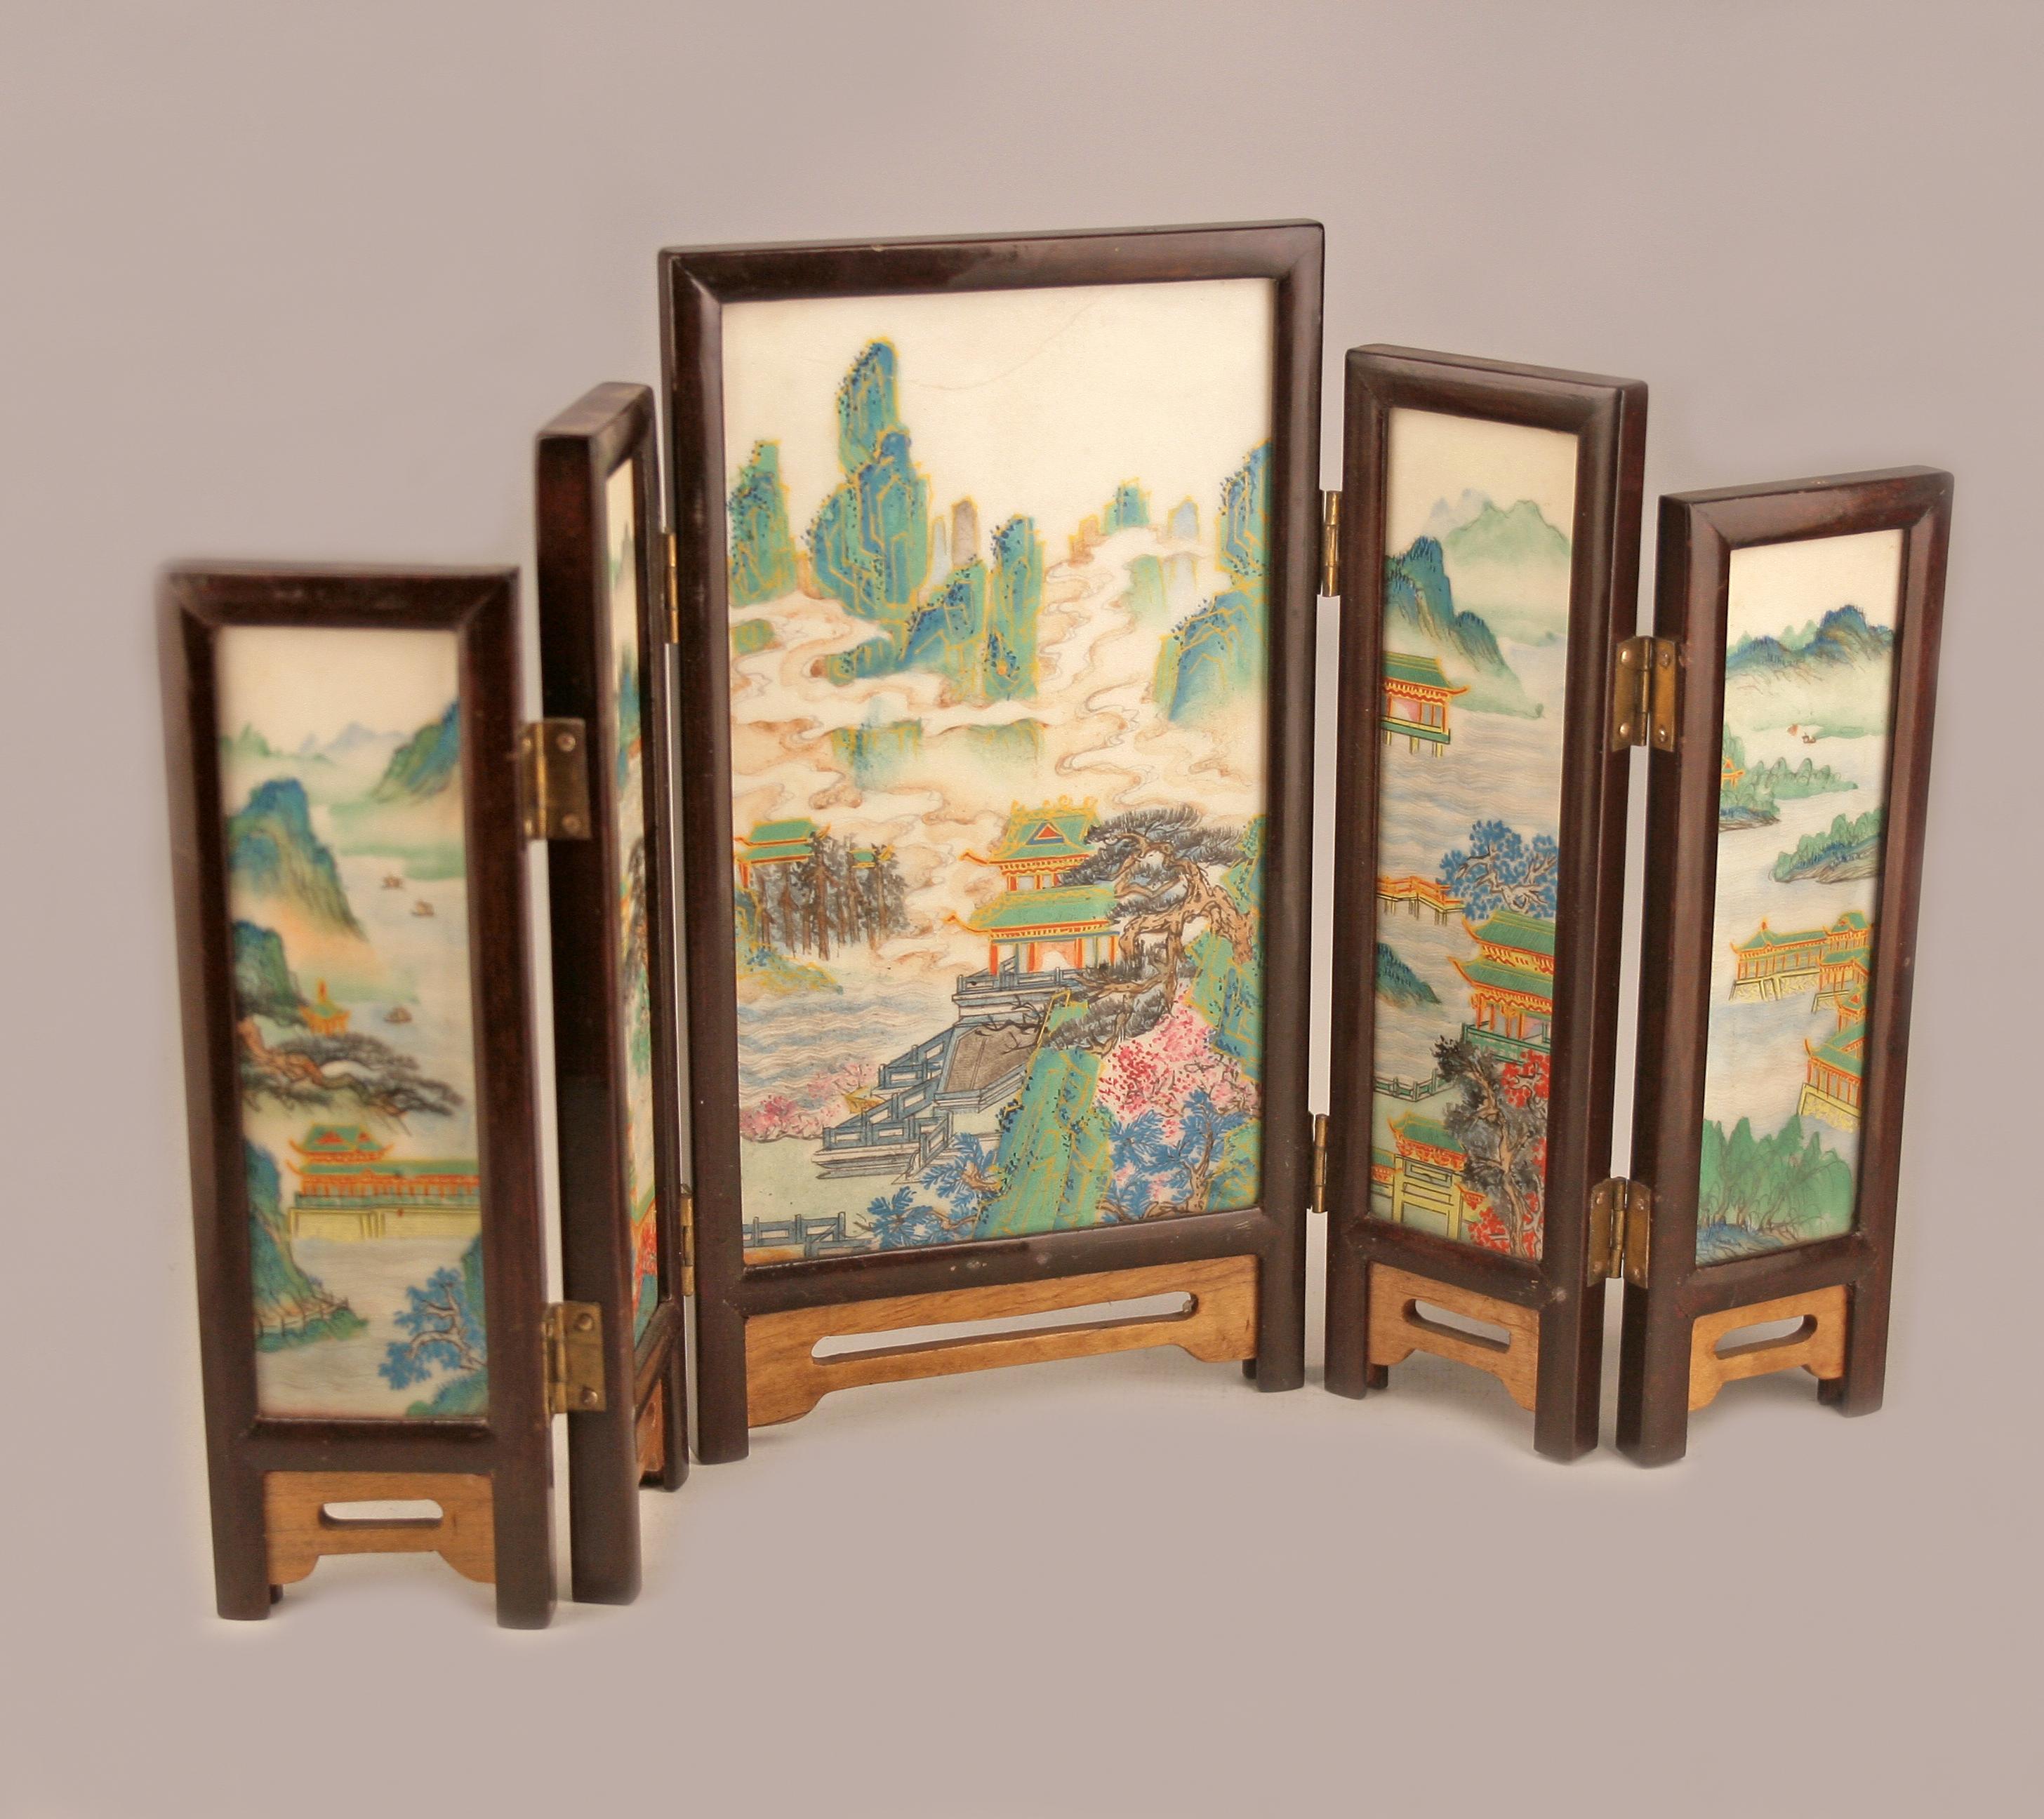 19th century/Edo-Meiji period japanese painted five-panel folding miniature screen

By: unknown
Material: lacquer, metal, paint, wood
Technique: carved, hand-carved, hand-painted, lacquered, painted, varnished, metalwork
Dimensions: 1 in x 4.5 in x